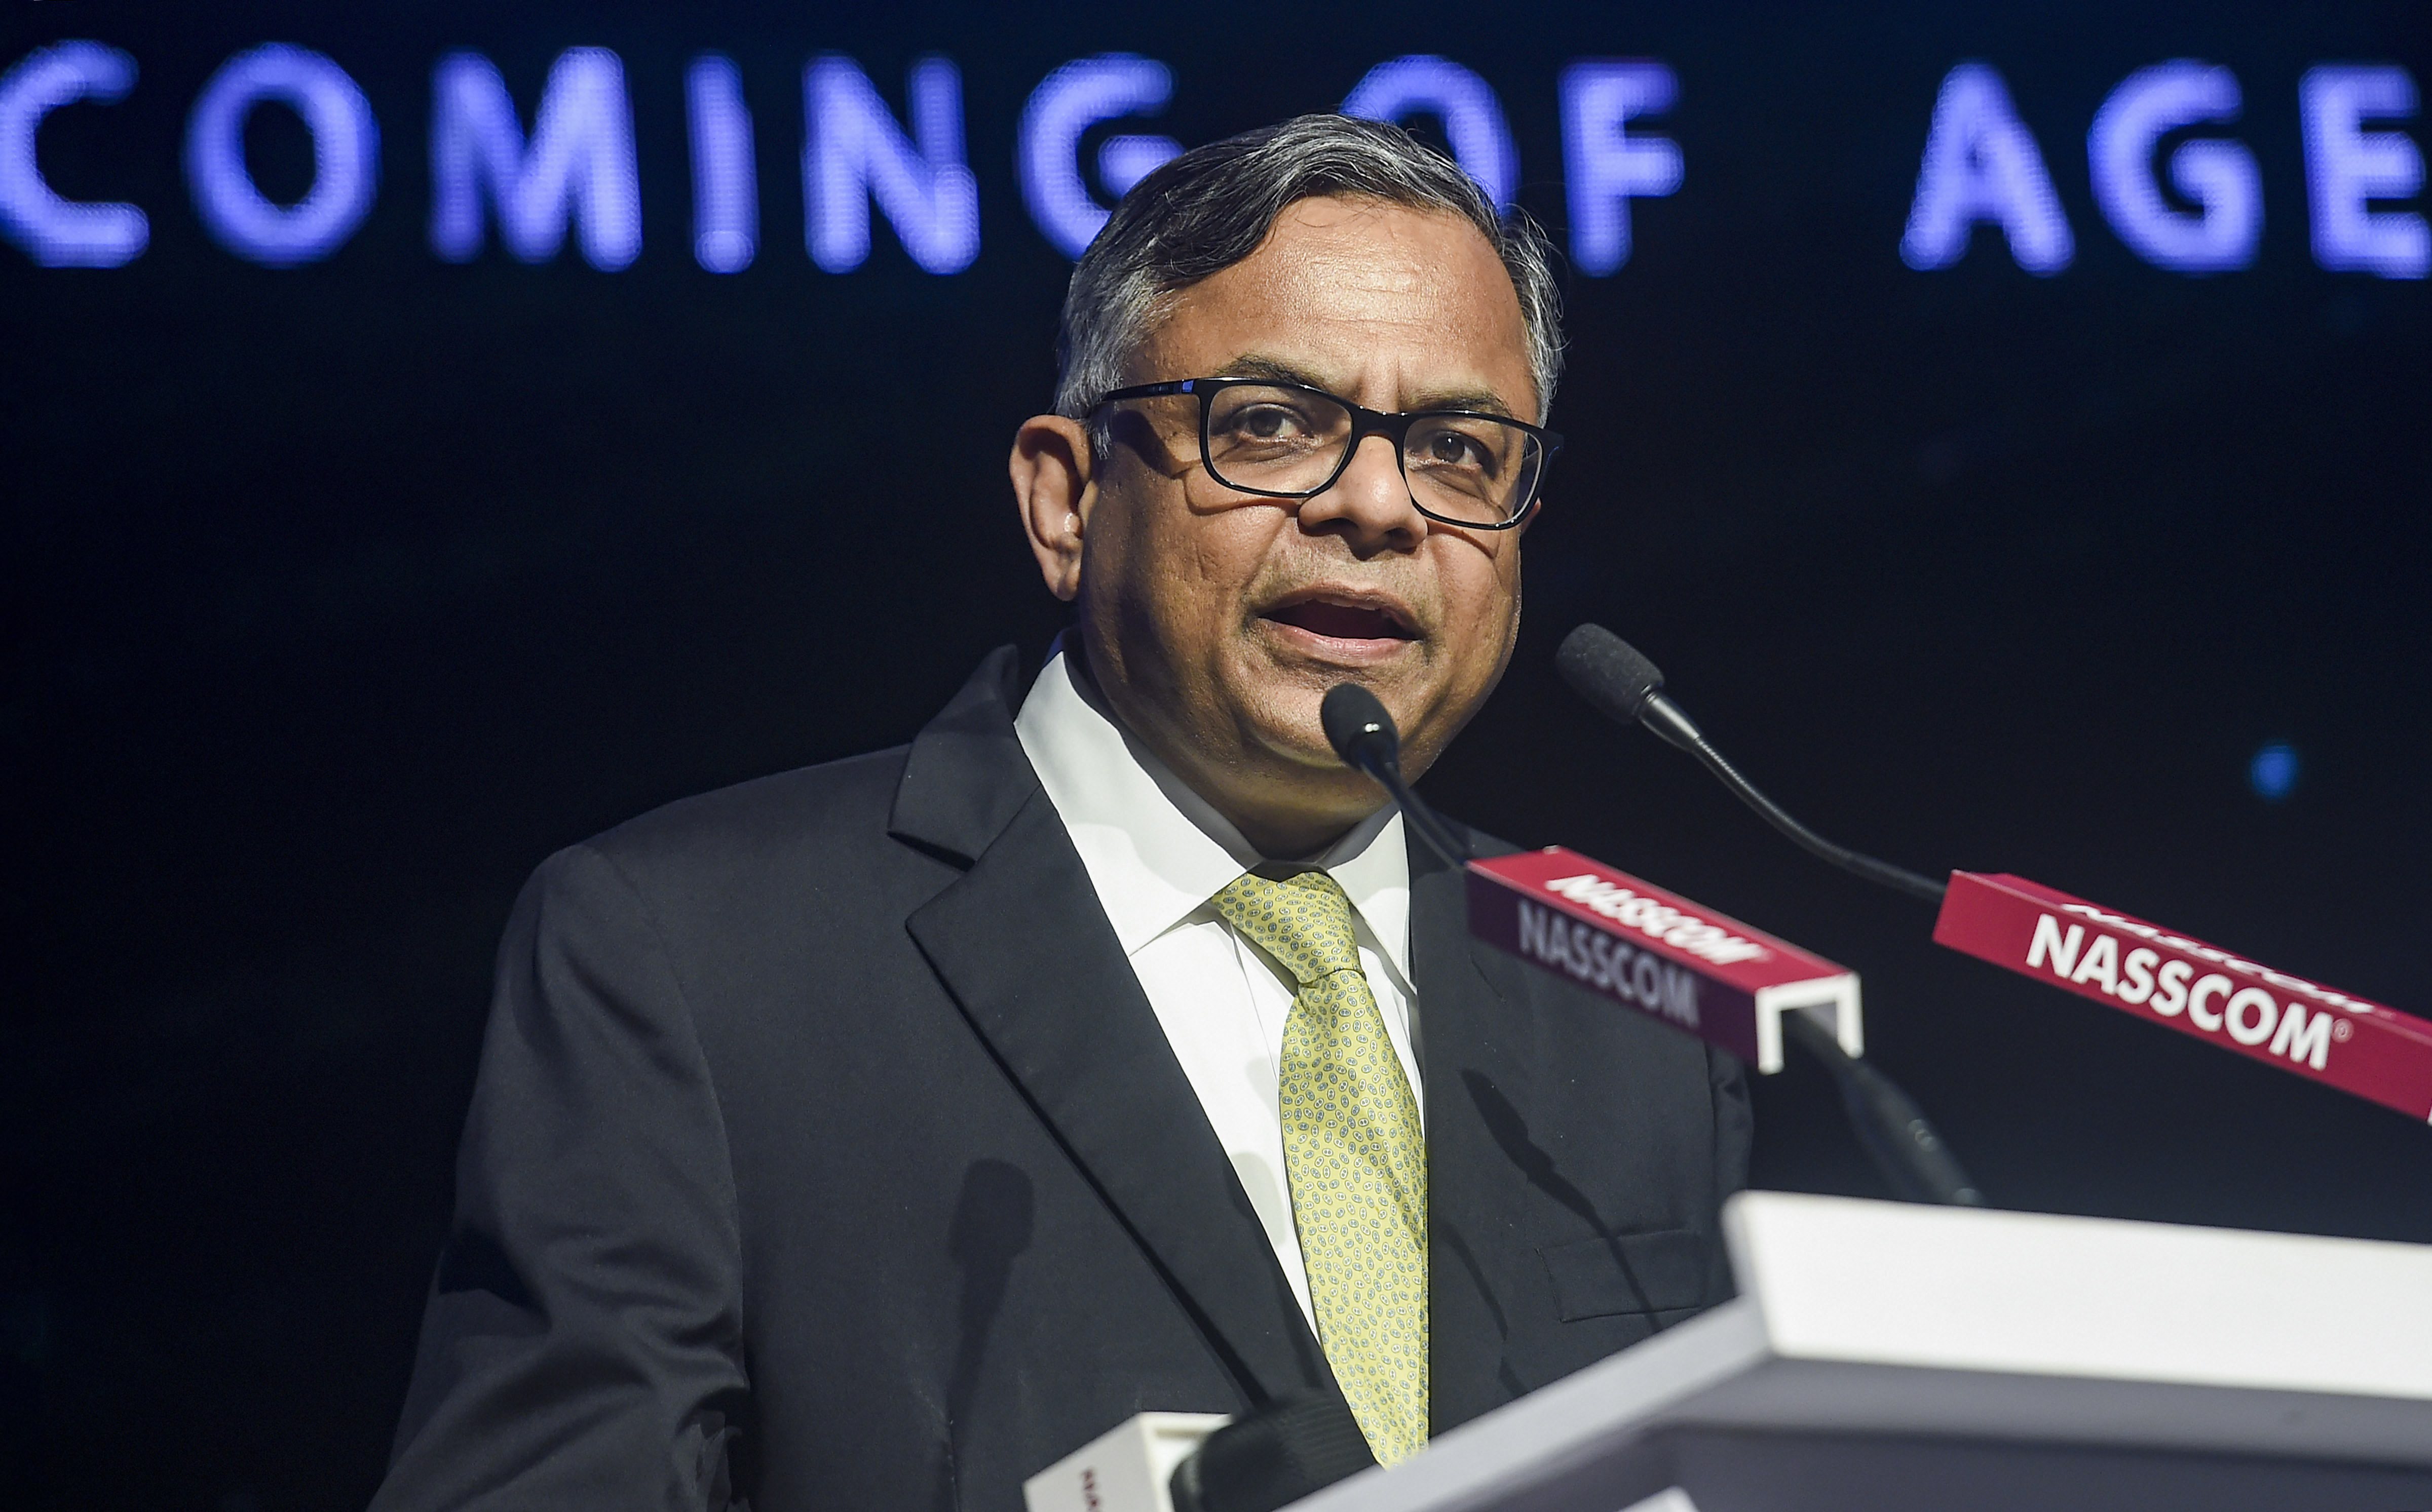 Peeing case: Tata Group head finally reacts, admits AI was slow to respond